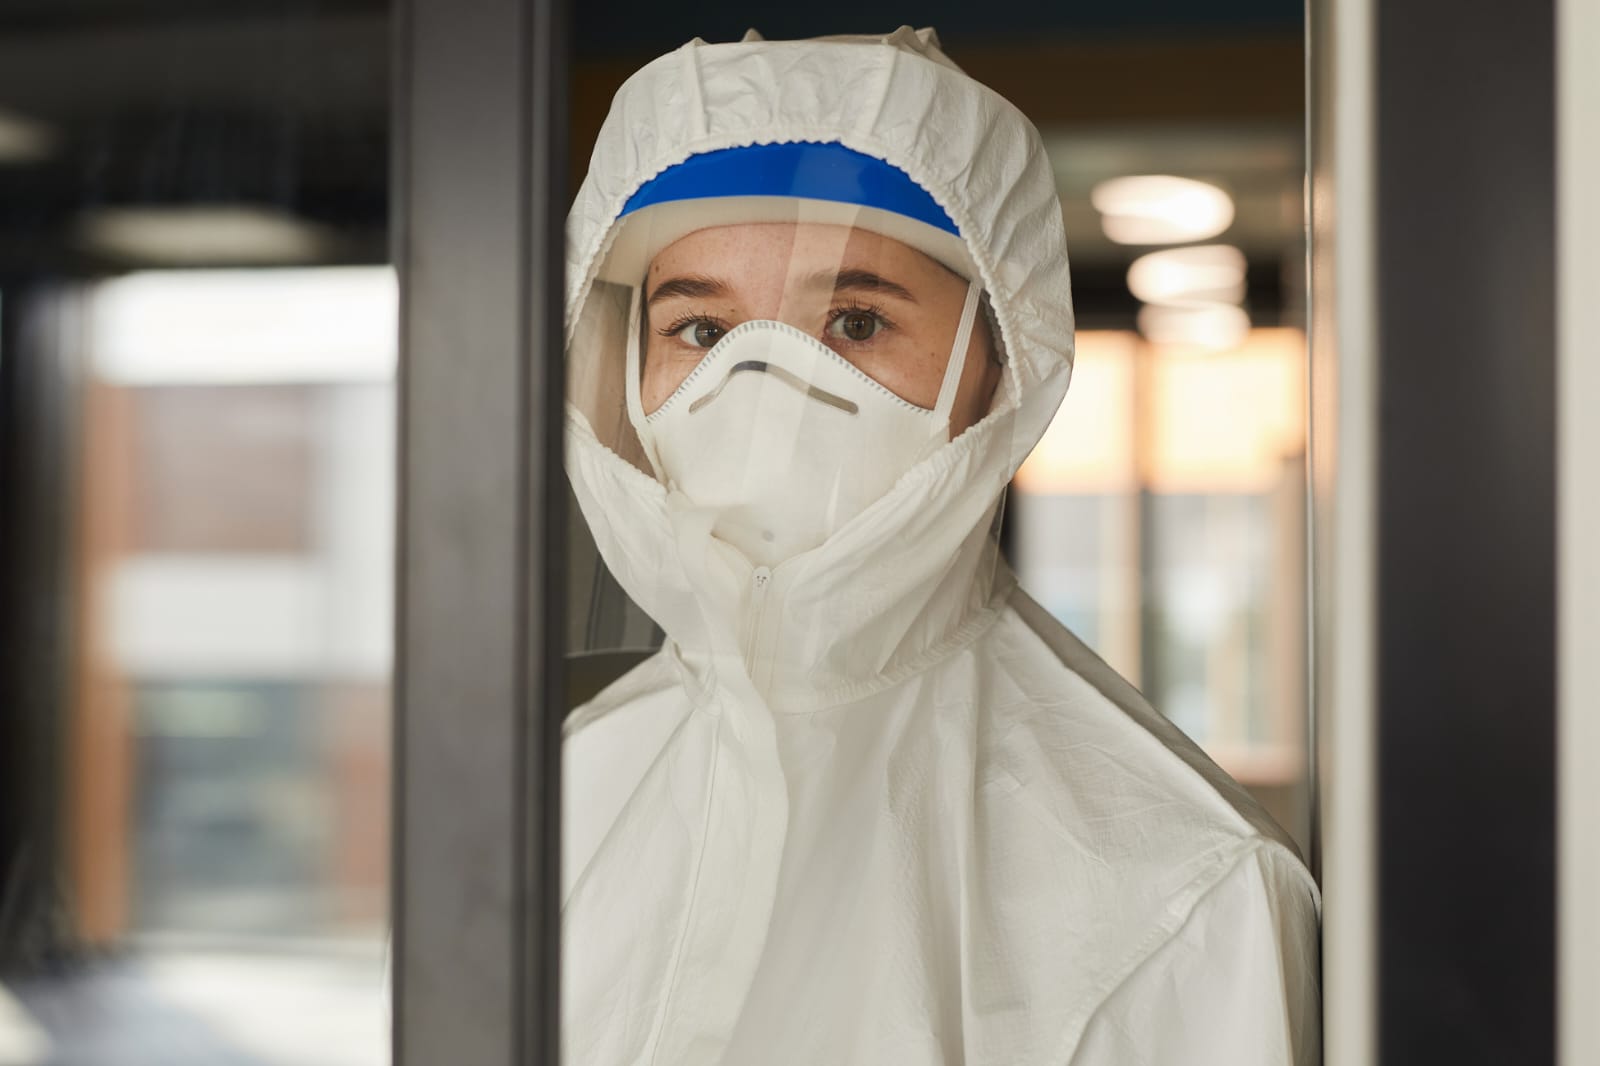 Respirators – Personal Protective Equipment Every Person Should Have on Hand